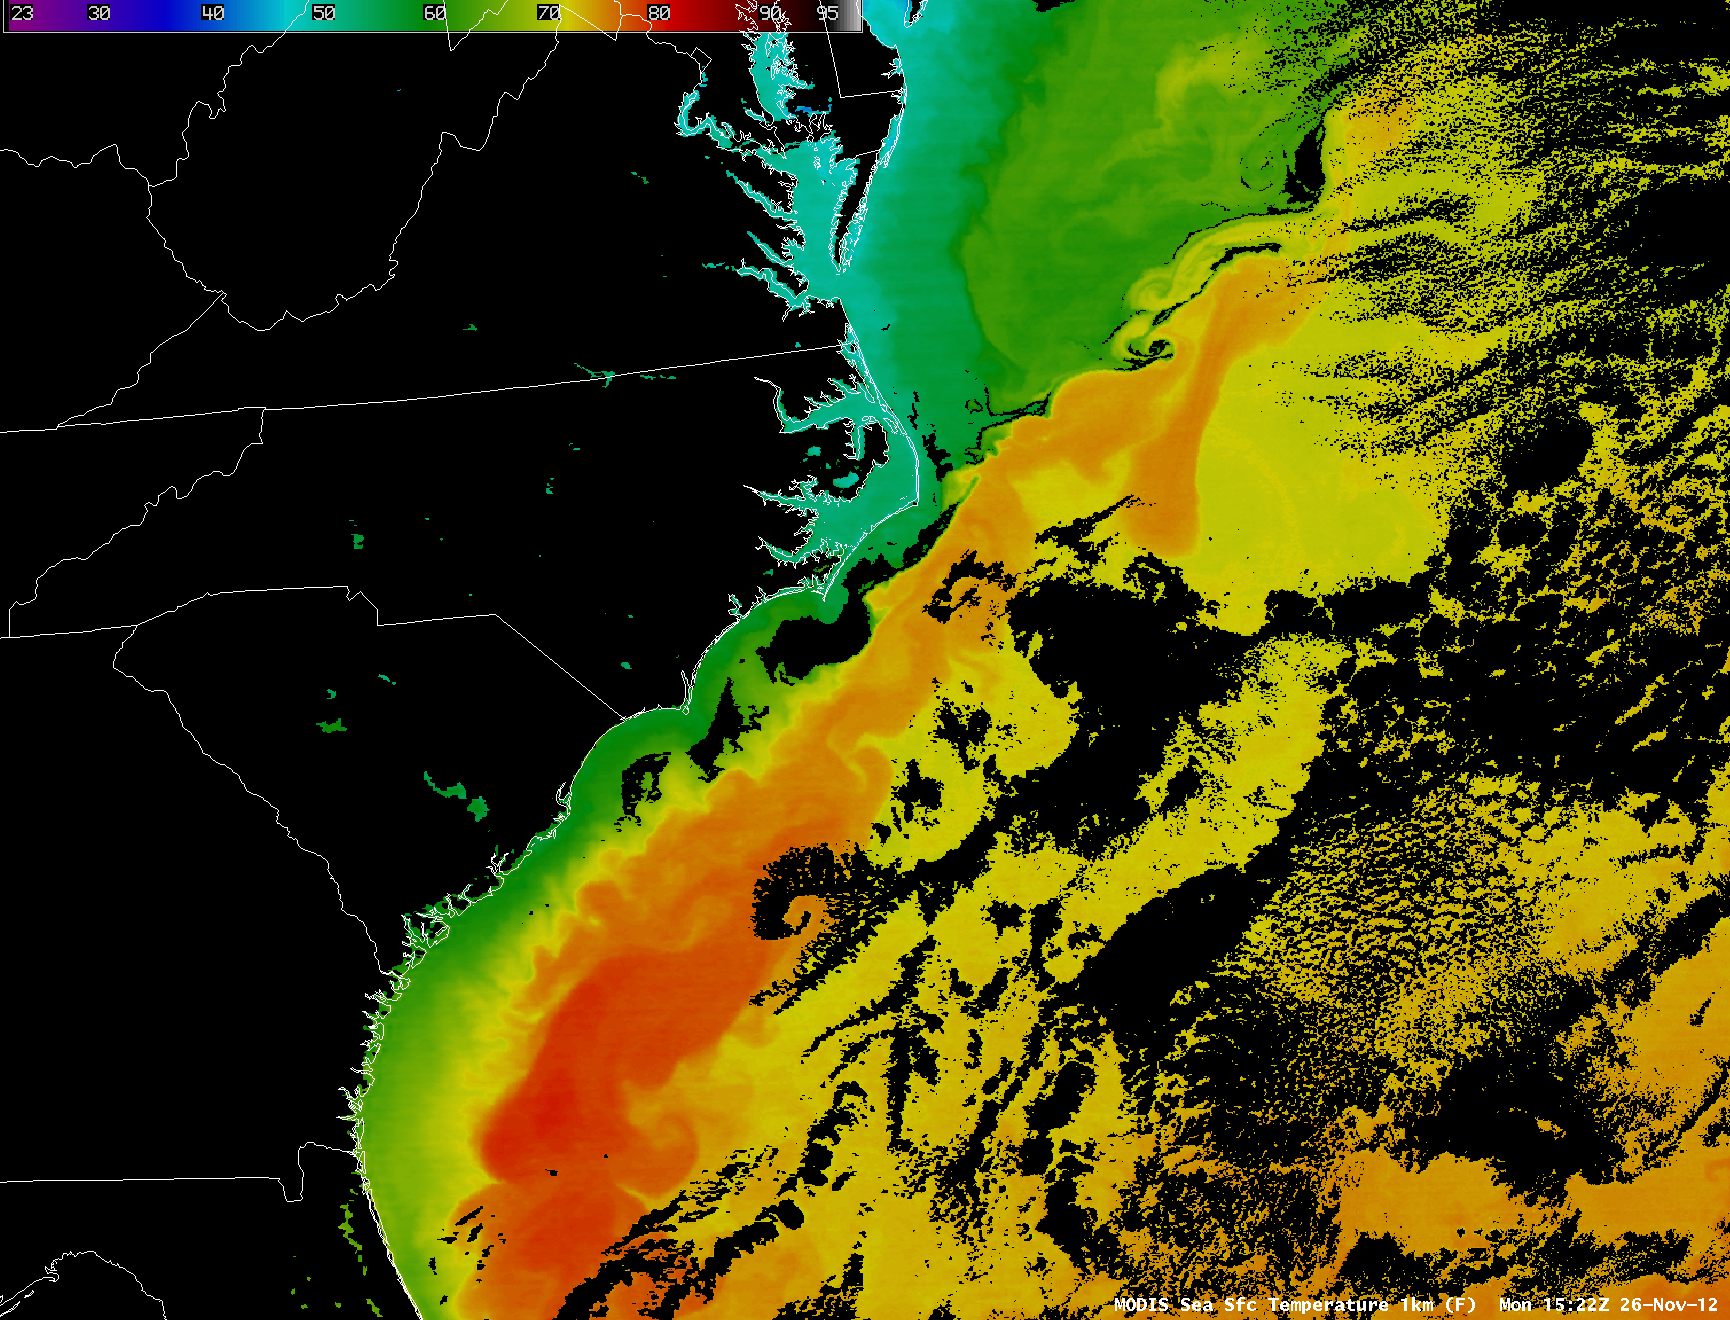 MODIS Sea Surface Temperature product images